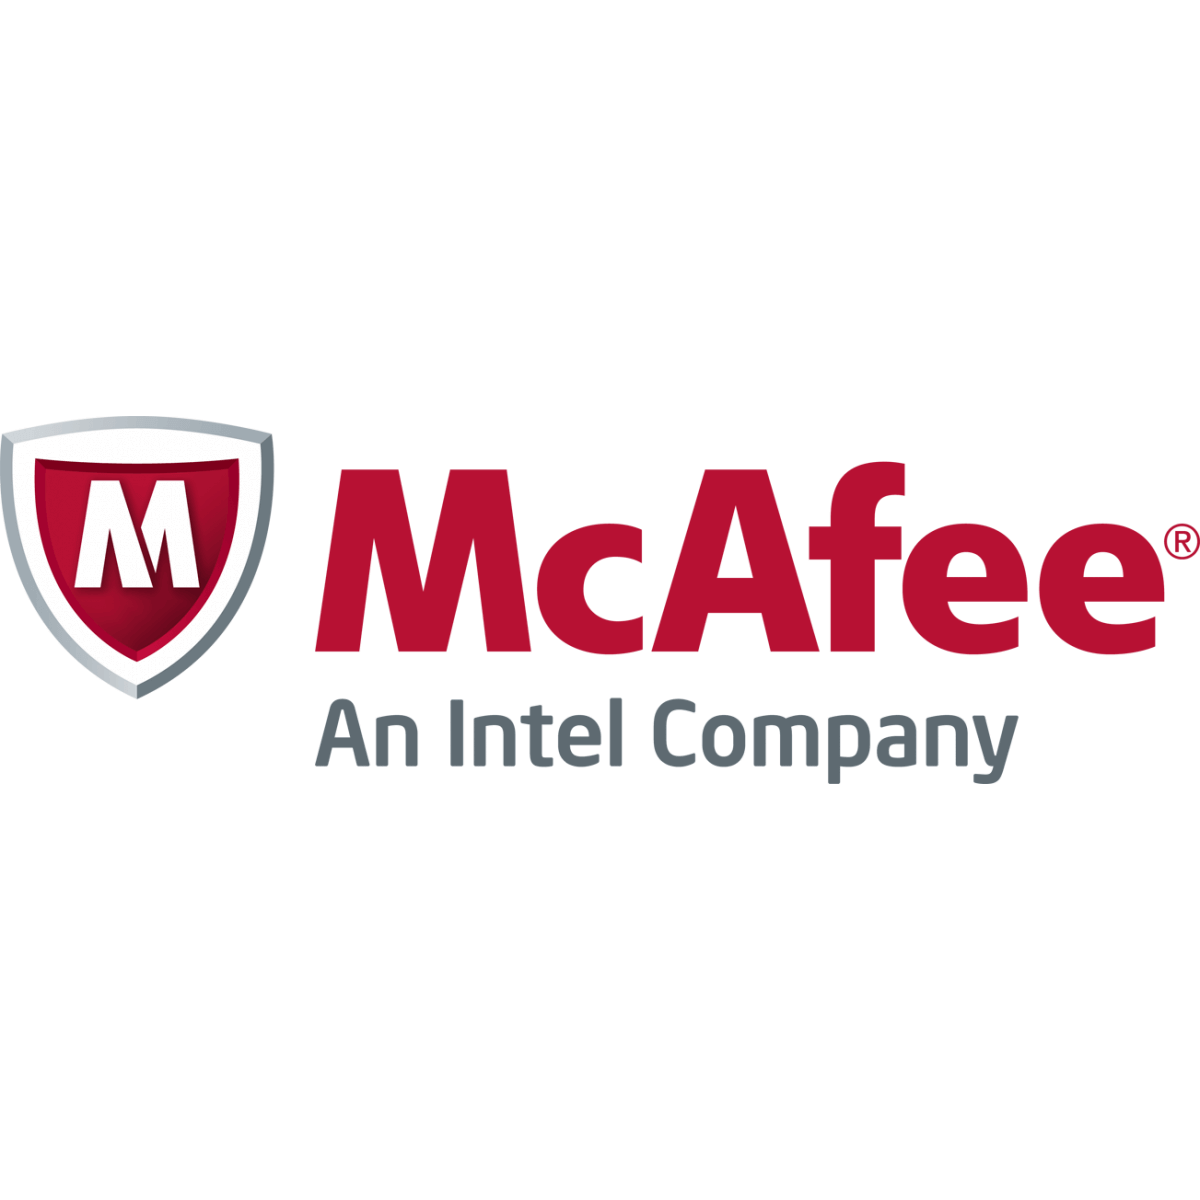 How to uninstall McAfee when the removal tool doesn't work